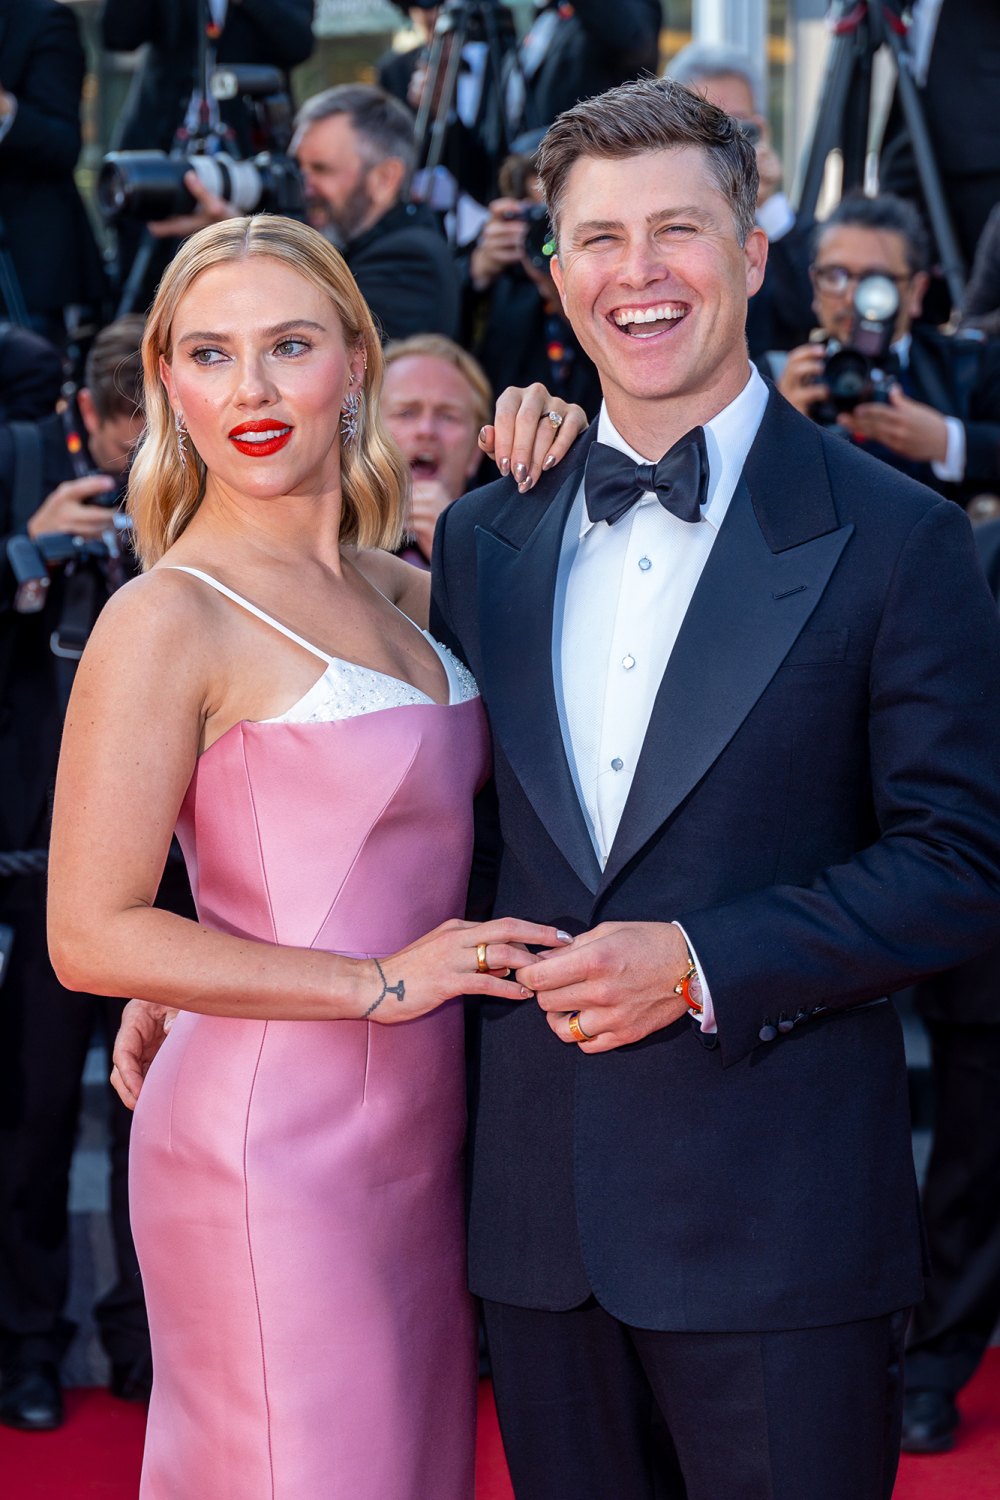 Colin Jost Jokes He Relies on Wife Scarlett Johansson’s Marvel Salary to Pay for His Ferry